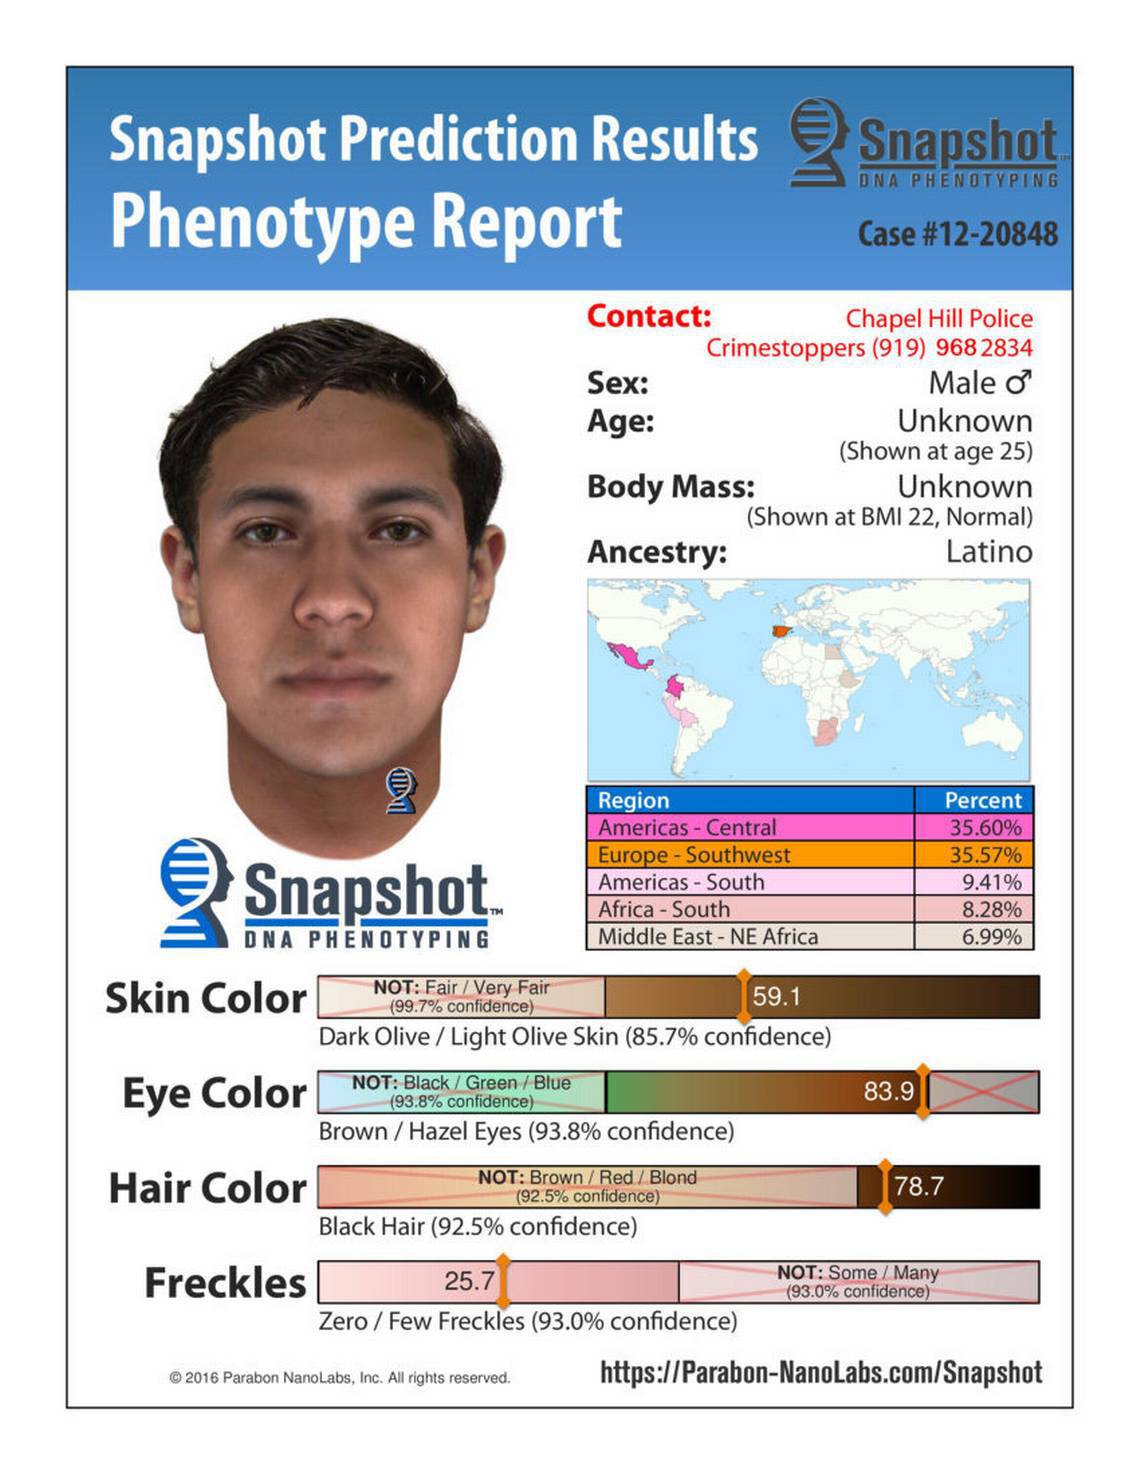 [IMAGE] How does genetic genealogy and phenotyping work? DNA agencies weigh in on NC crimes